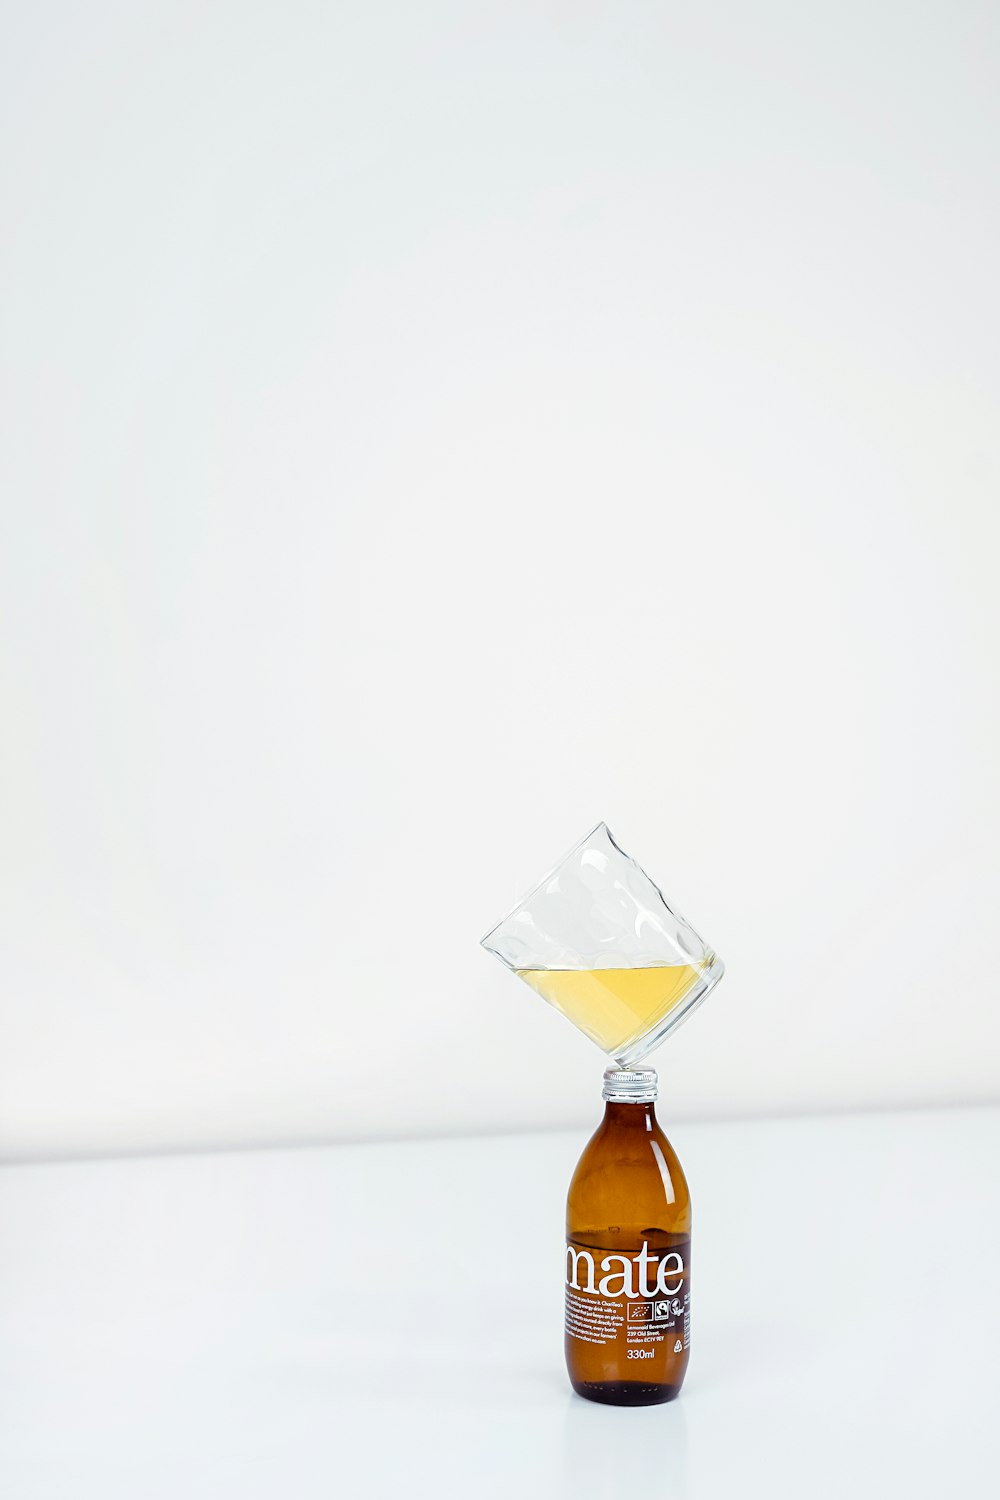 1/4 full clear drinking glass on top of amber bottle